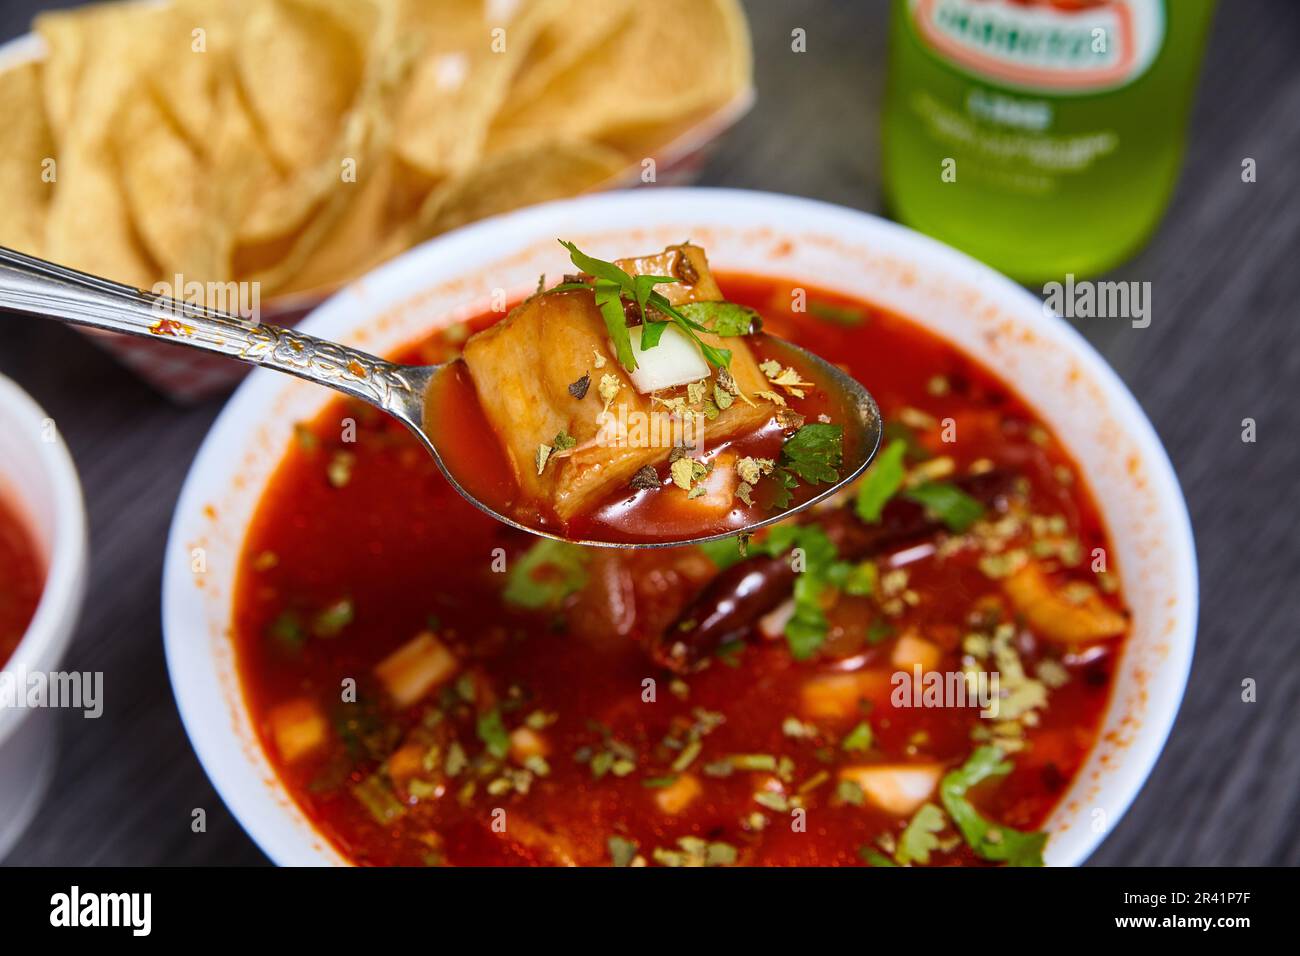 Menudo soup hominy grits tripe stew Mexican meal Jarritos lime soda tortilla chips food in spoon Stock Photo